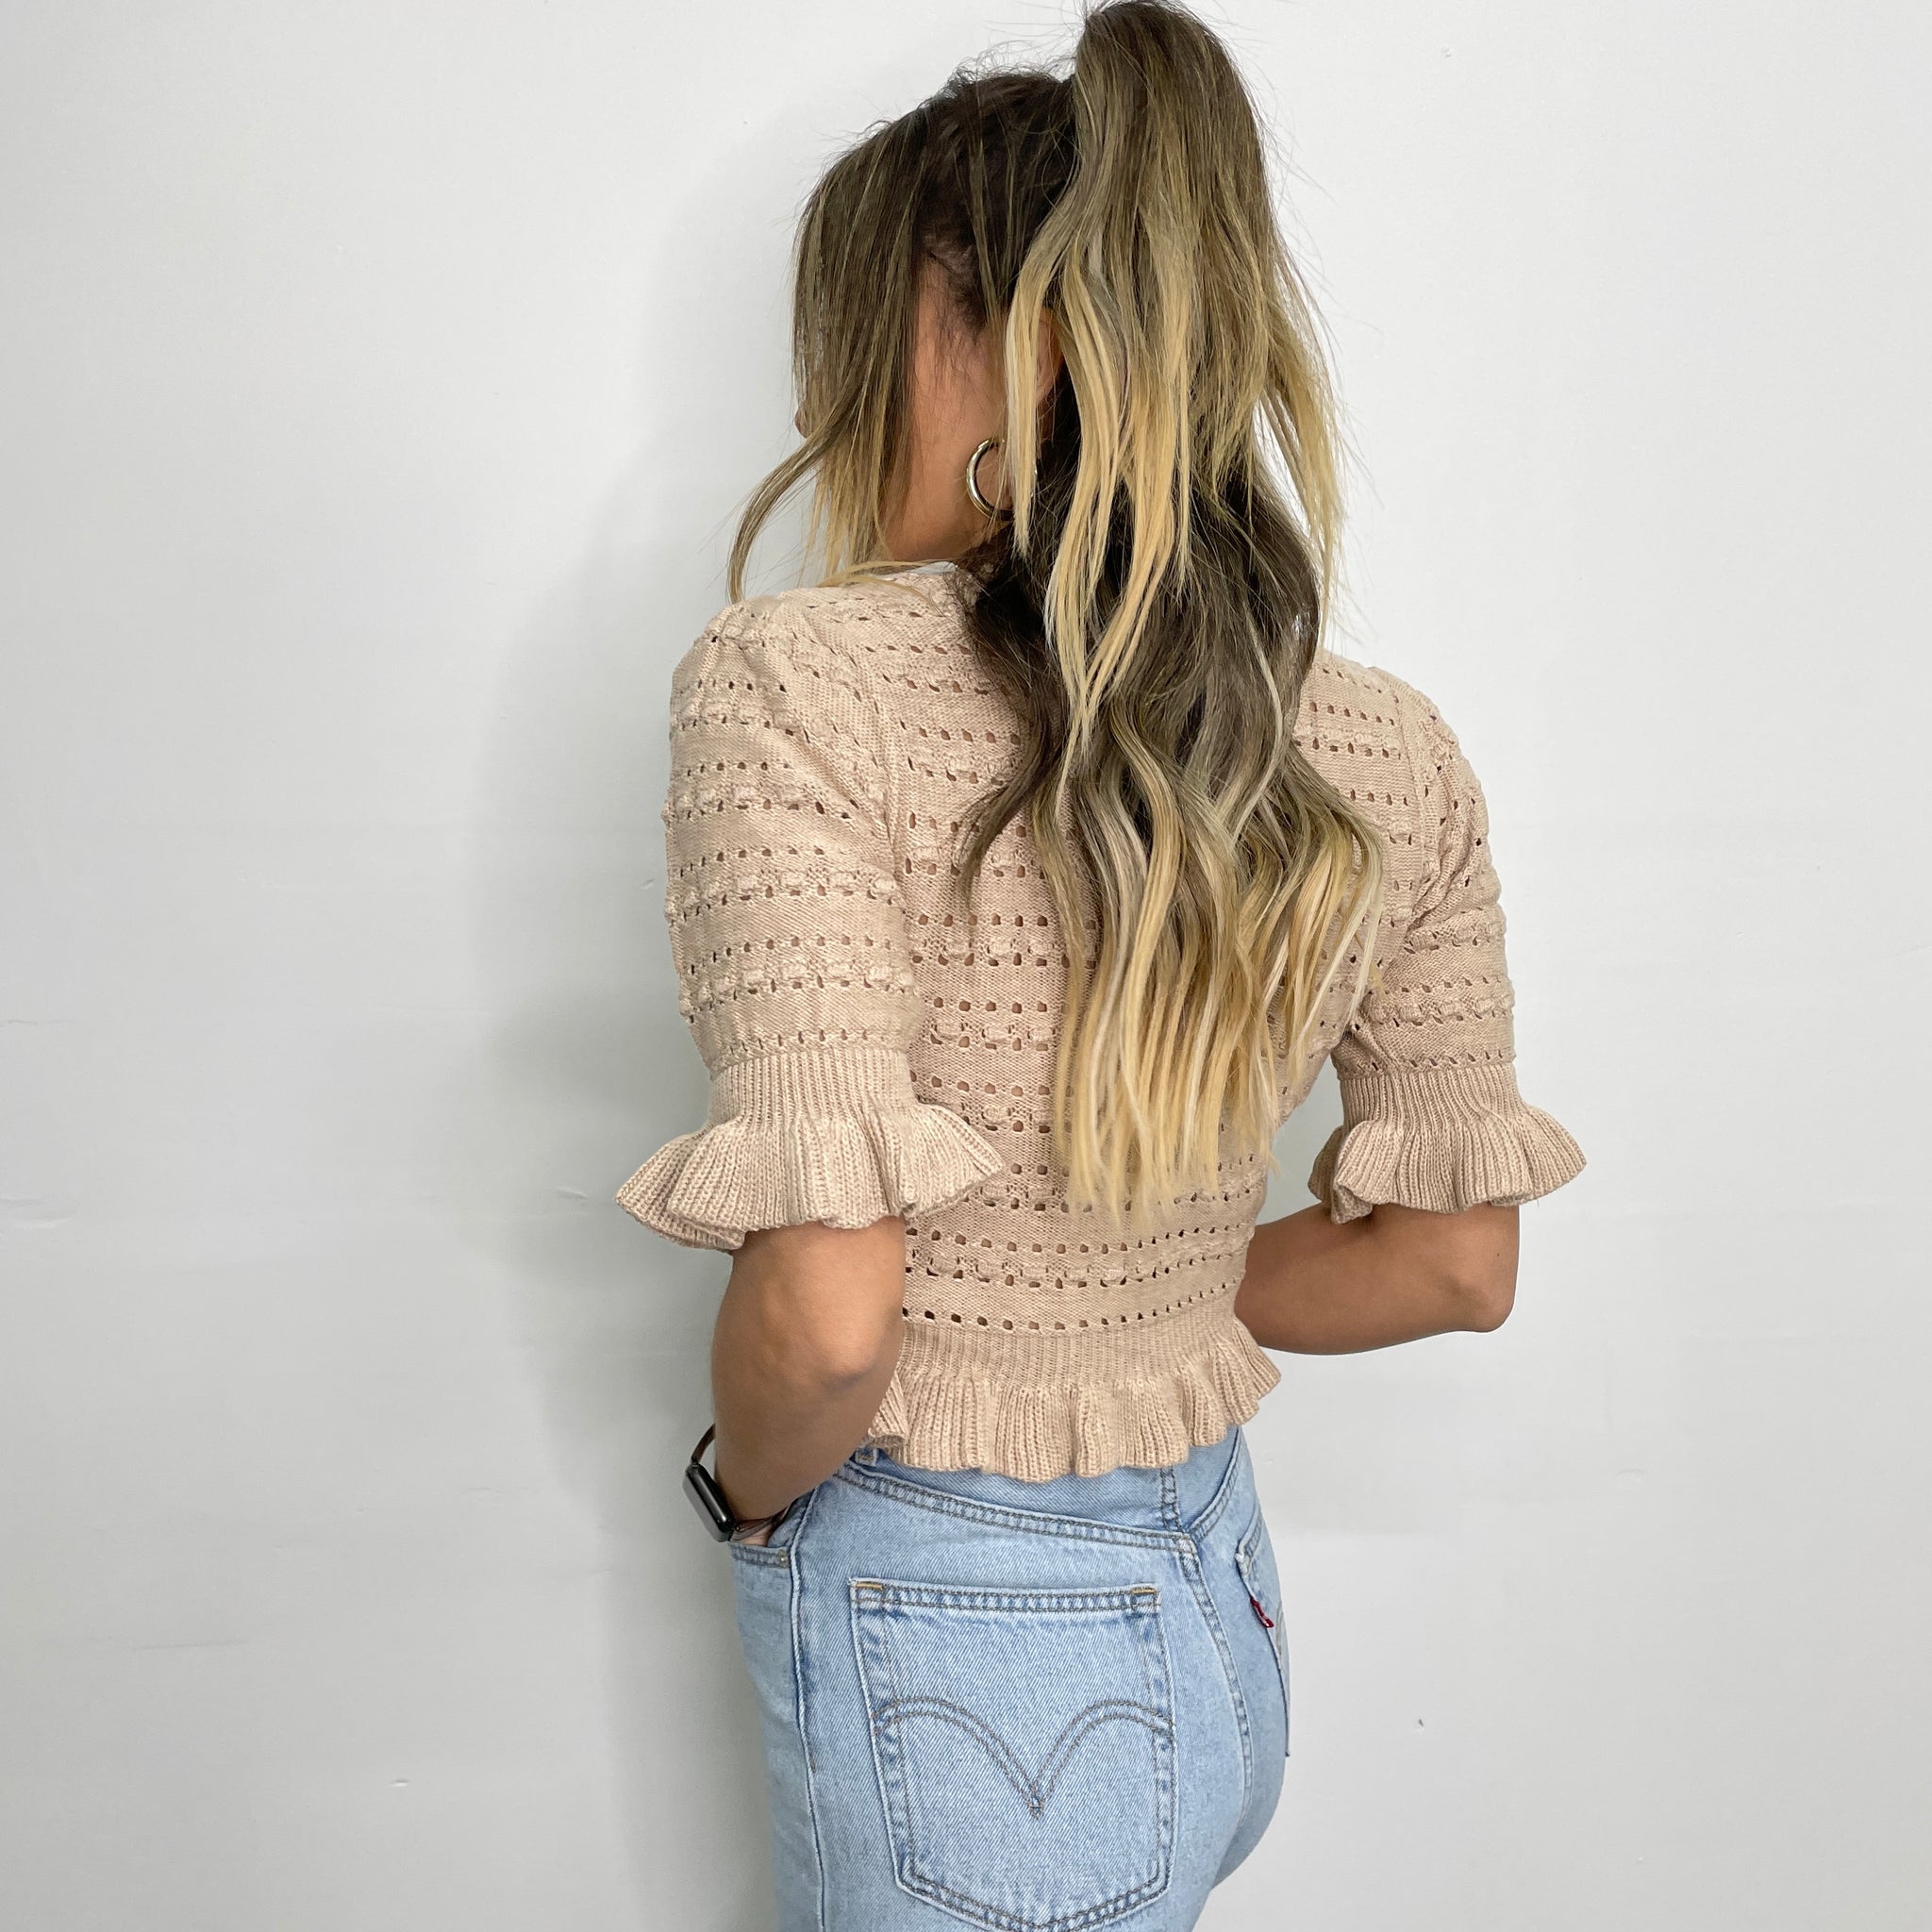 Other Side Knit Top